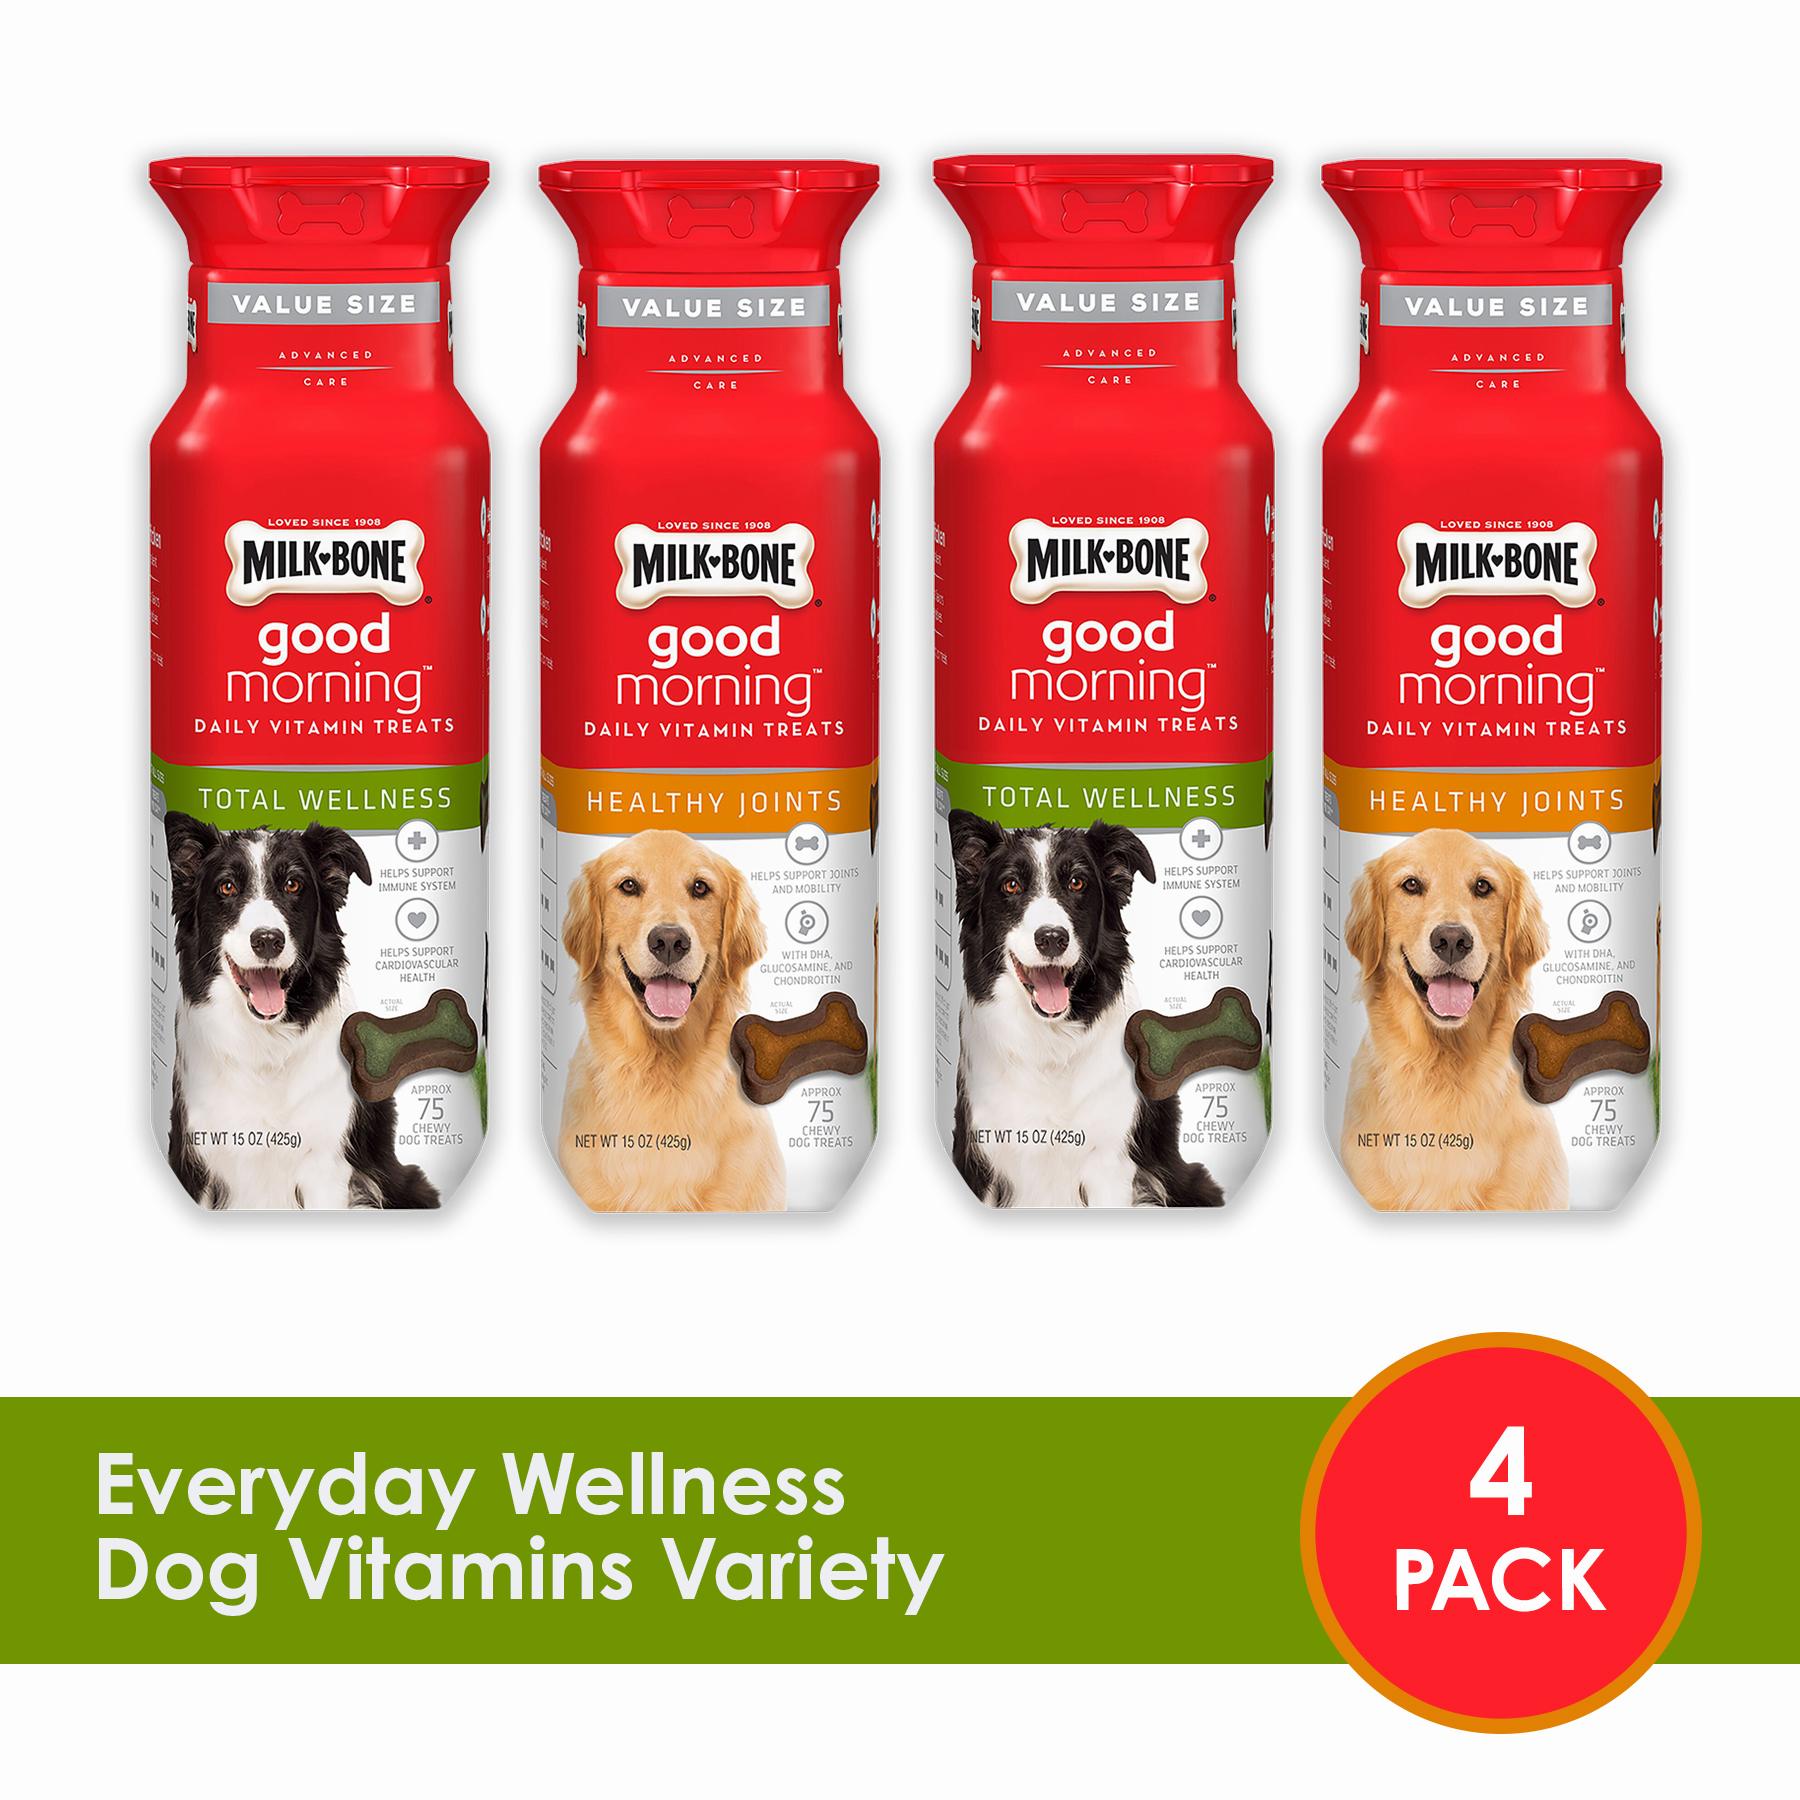 Four containers of Milk-Bone dog vitamins in two flavors.